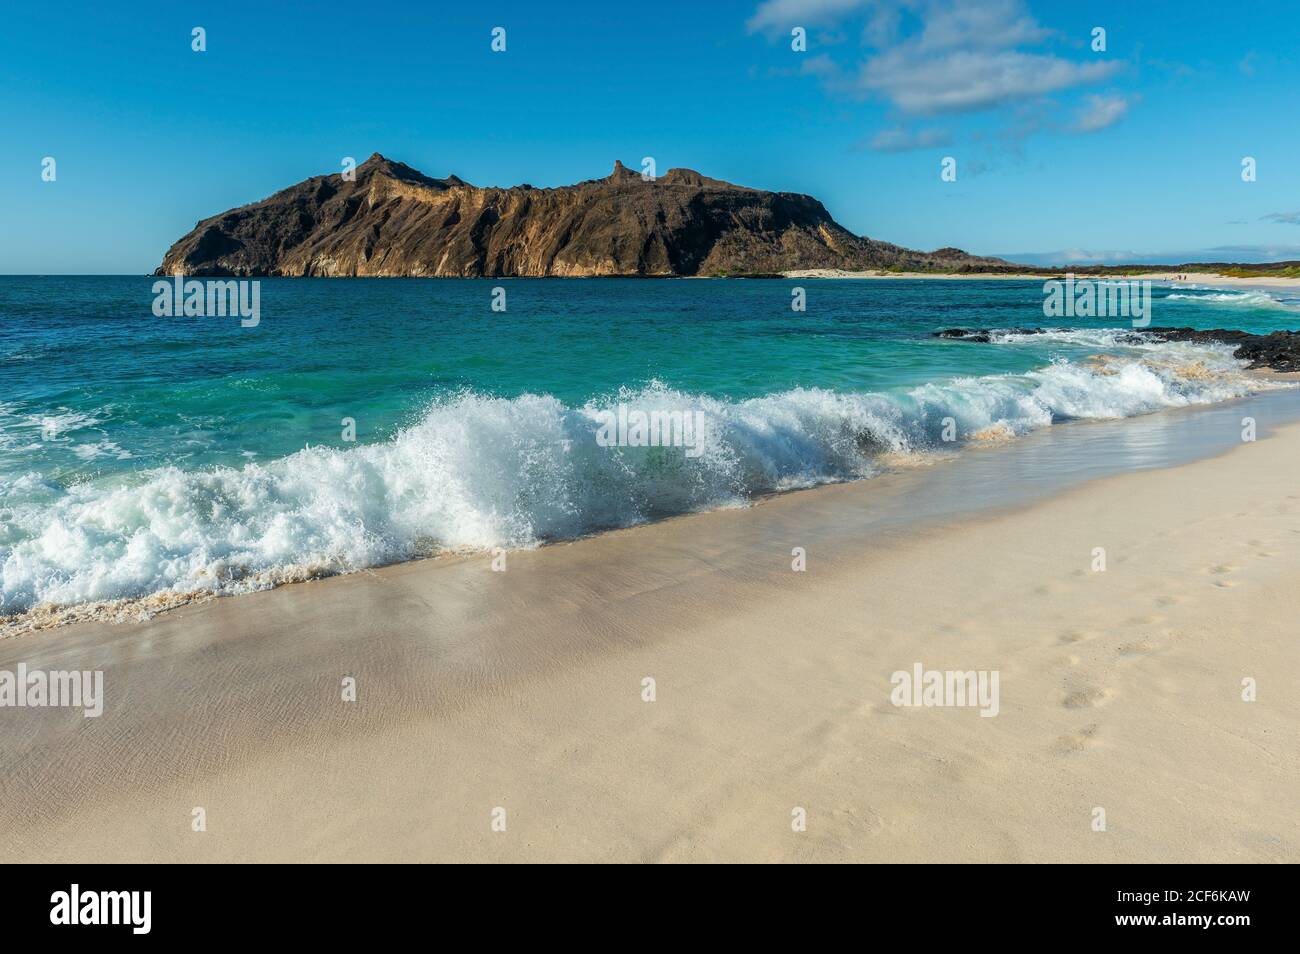 Landscape of strong waves by the beach in Stephens Bay with Witch Hill in the background, San Cristobal island, Galapagos, Ecuador. Stock Photo